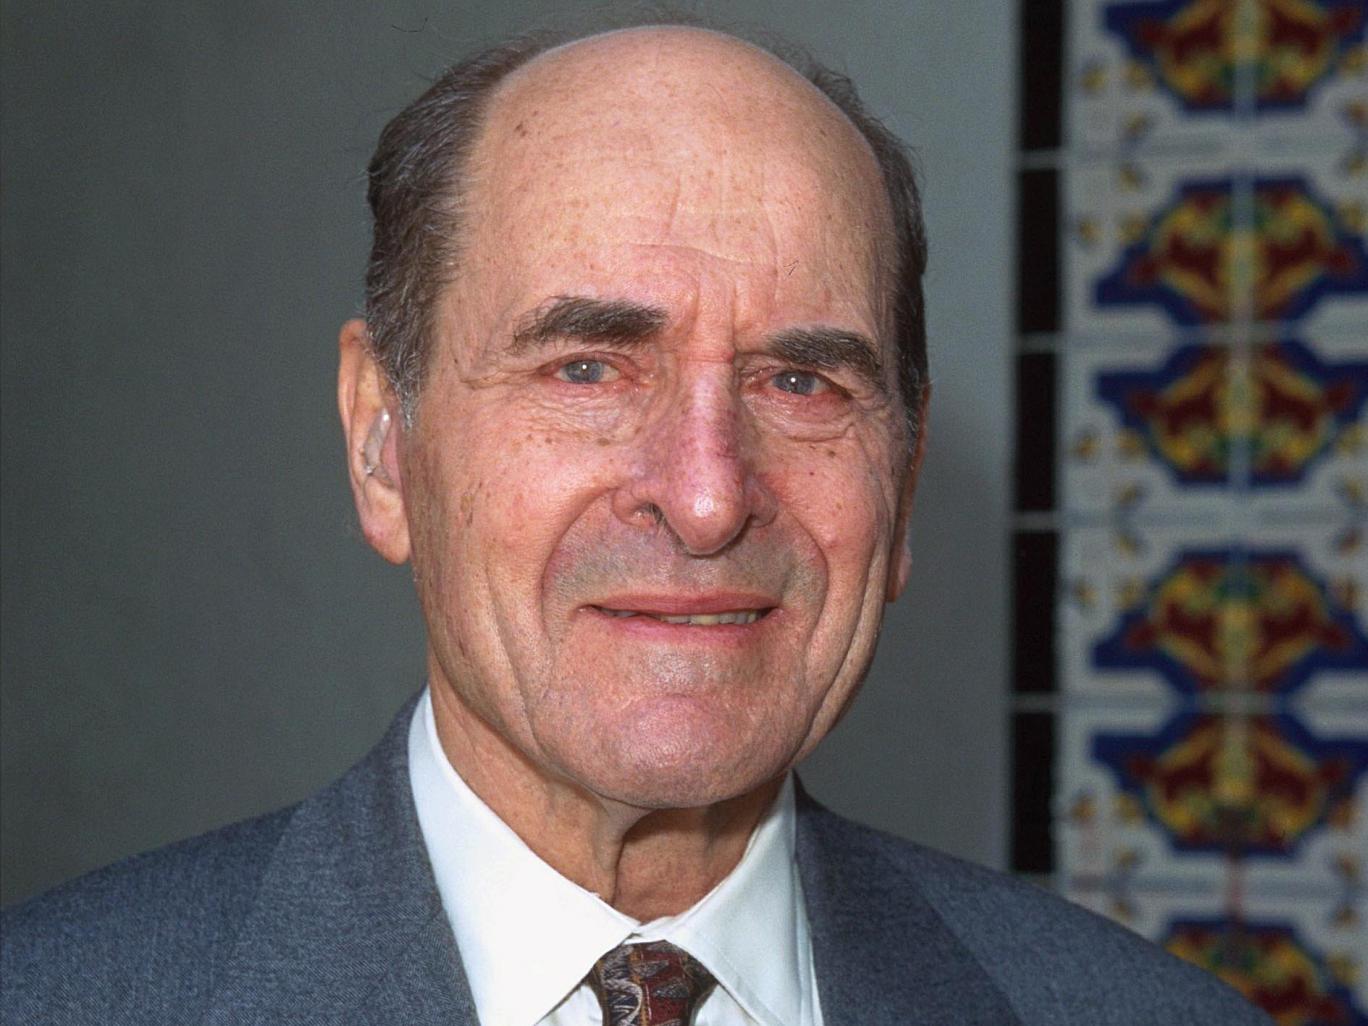 Dr Heimlich died in hospital on Friday night following complications from a heart attack he suffered four days before, his family said